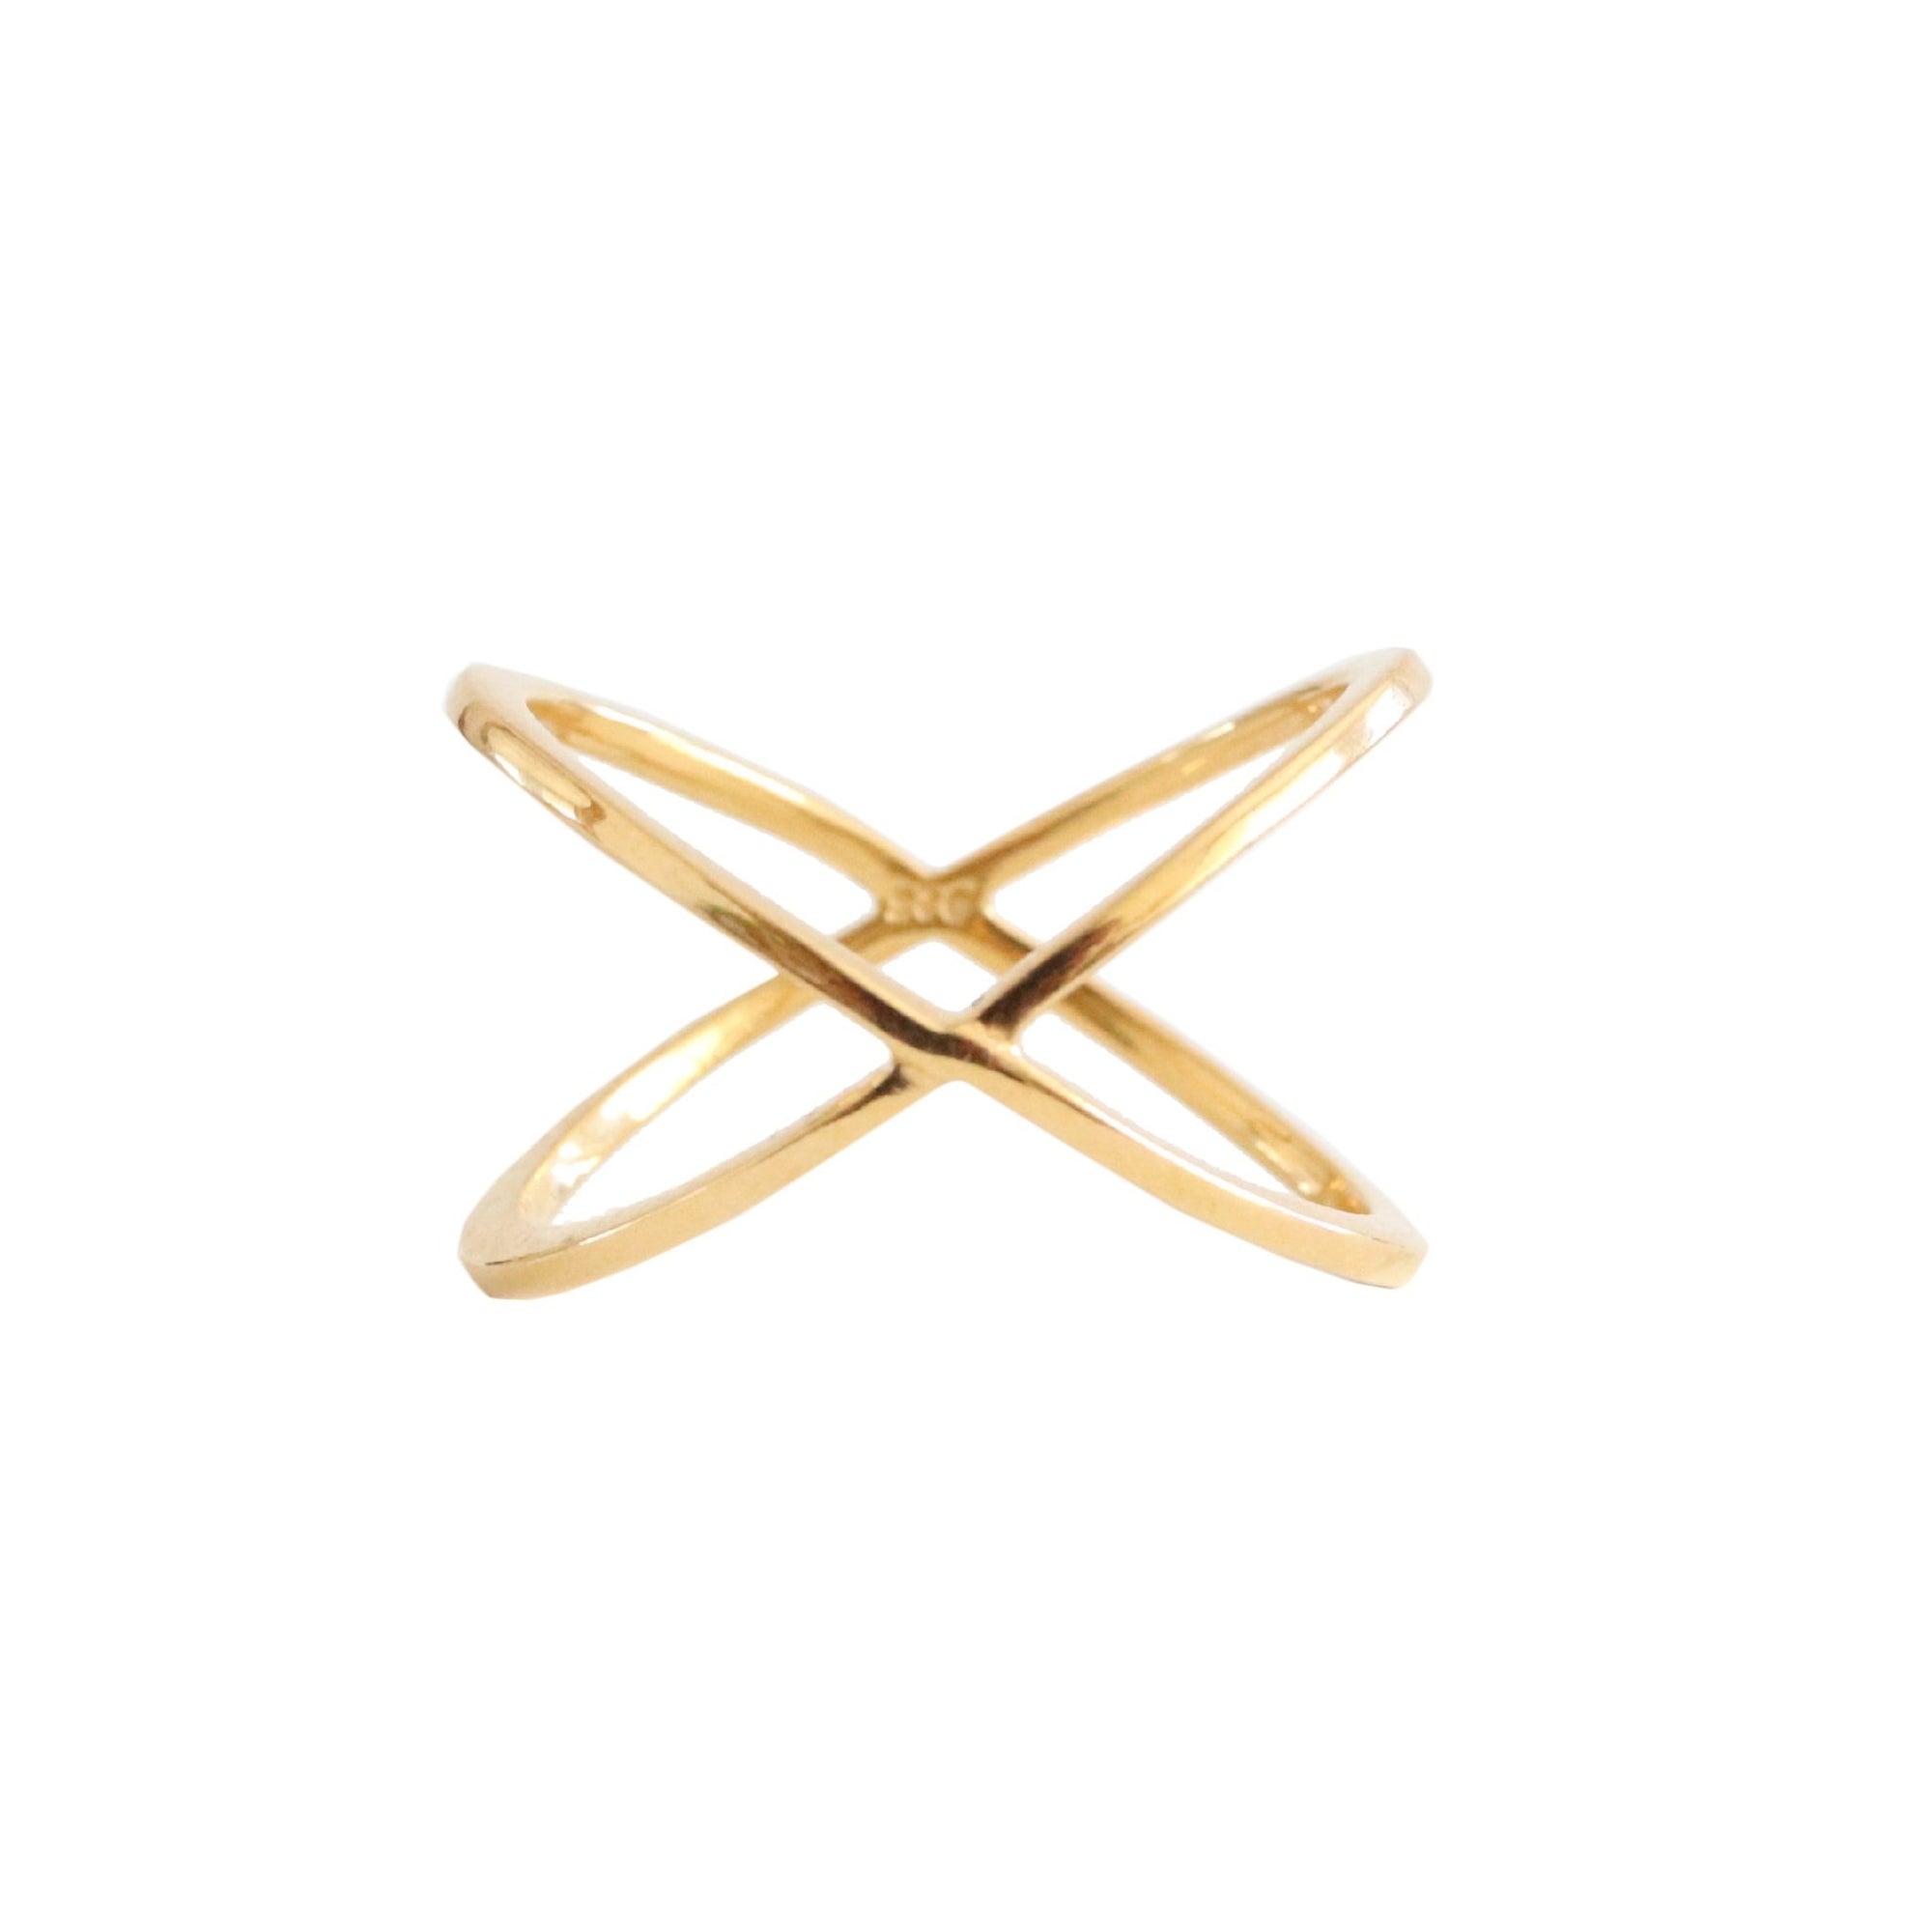 POISE CROSSED BAR RING - GOLD - SO PRETTY CARA COTTER